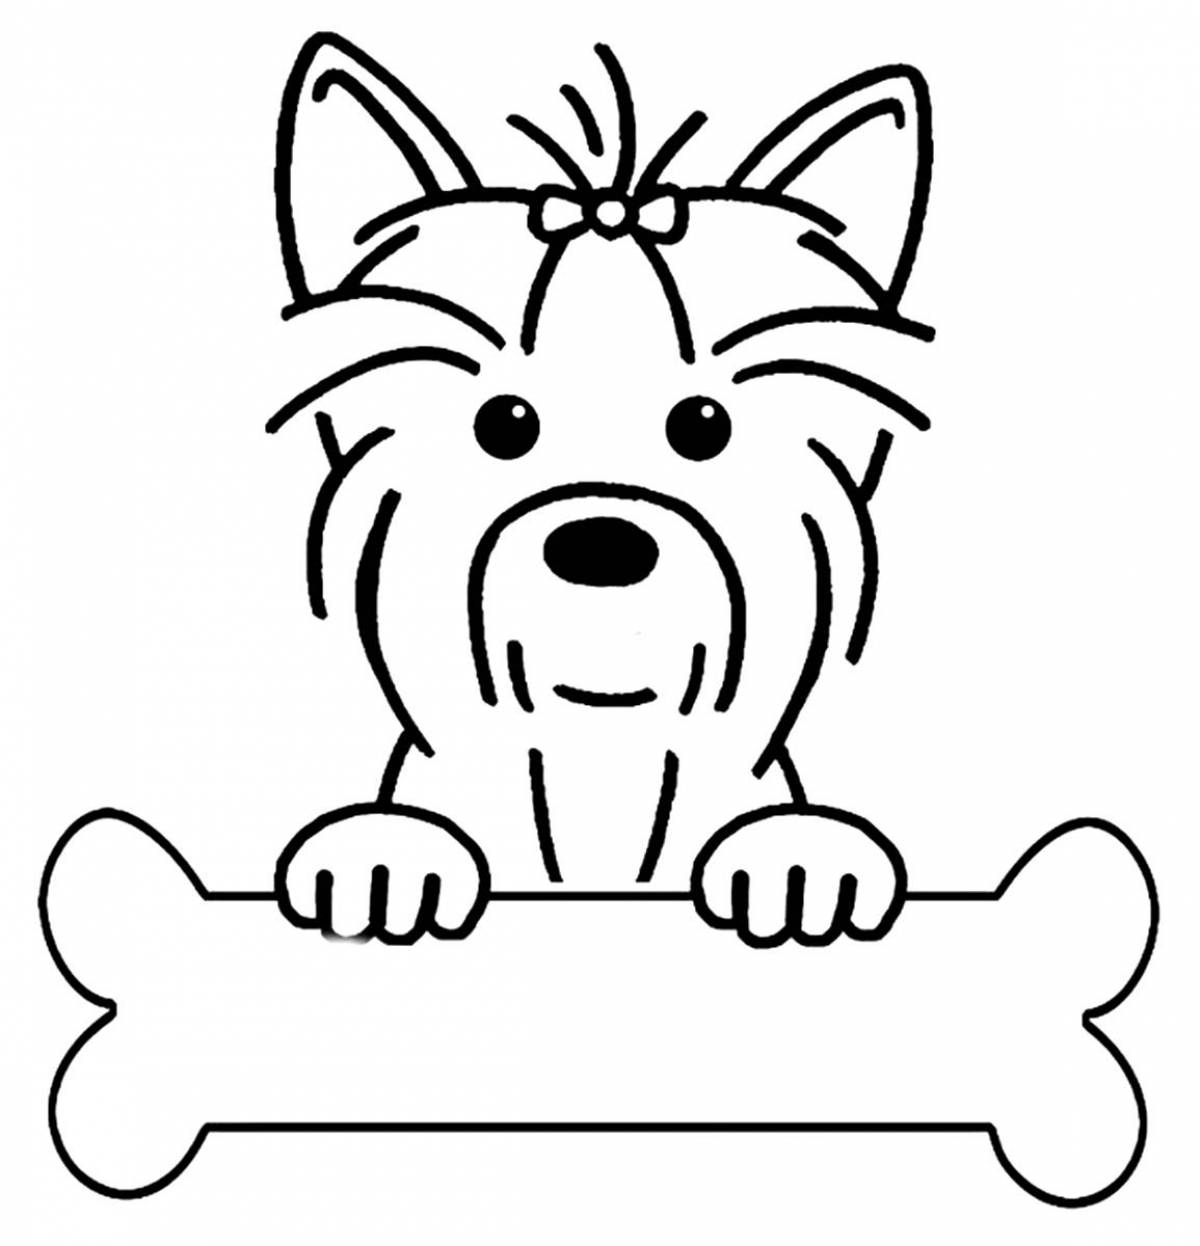 Coloring page energetic yorkshire terrier